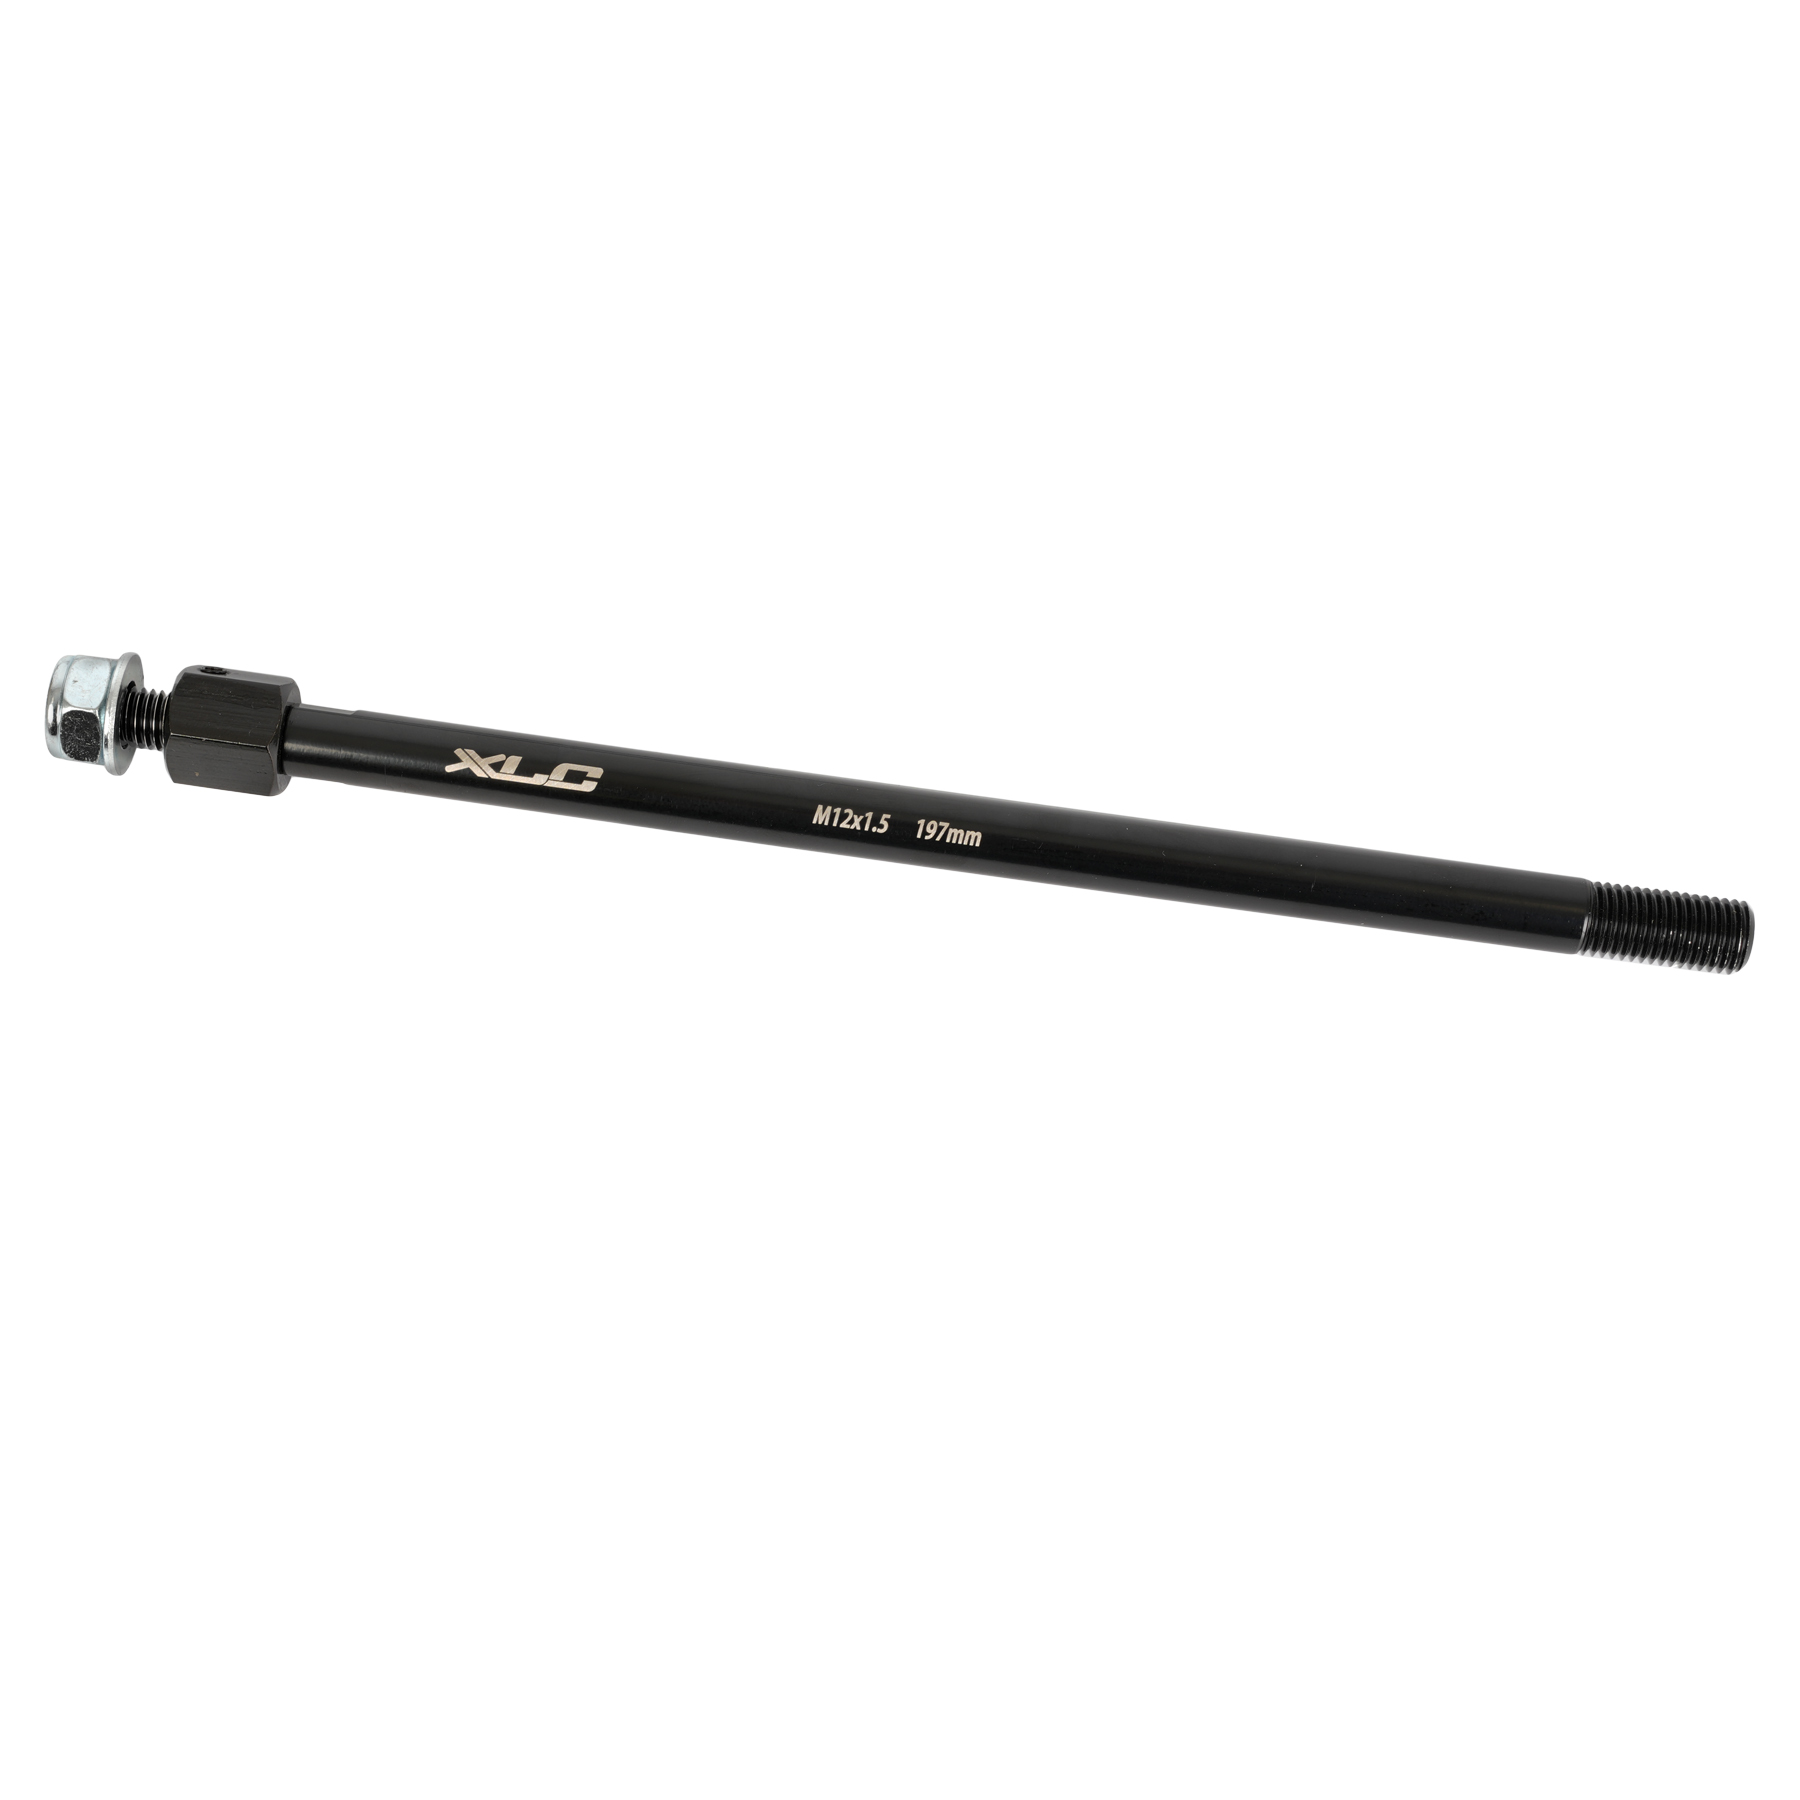 Image of XLC Thru Axle for MONO S and DUO S - M12x1,5 - 229mm Shimano / Fatbike 197mm